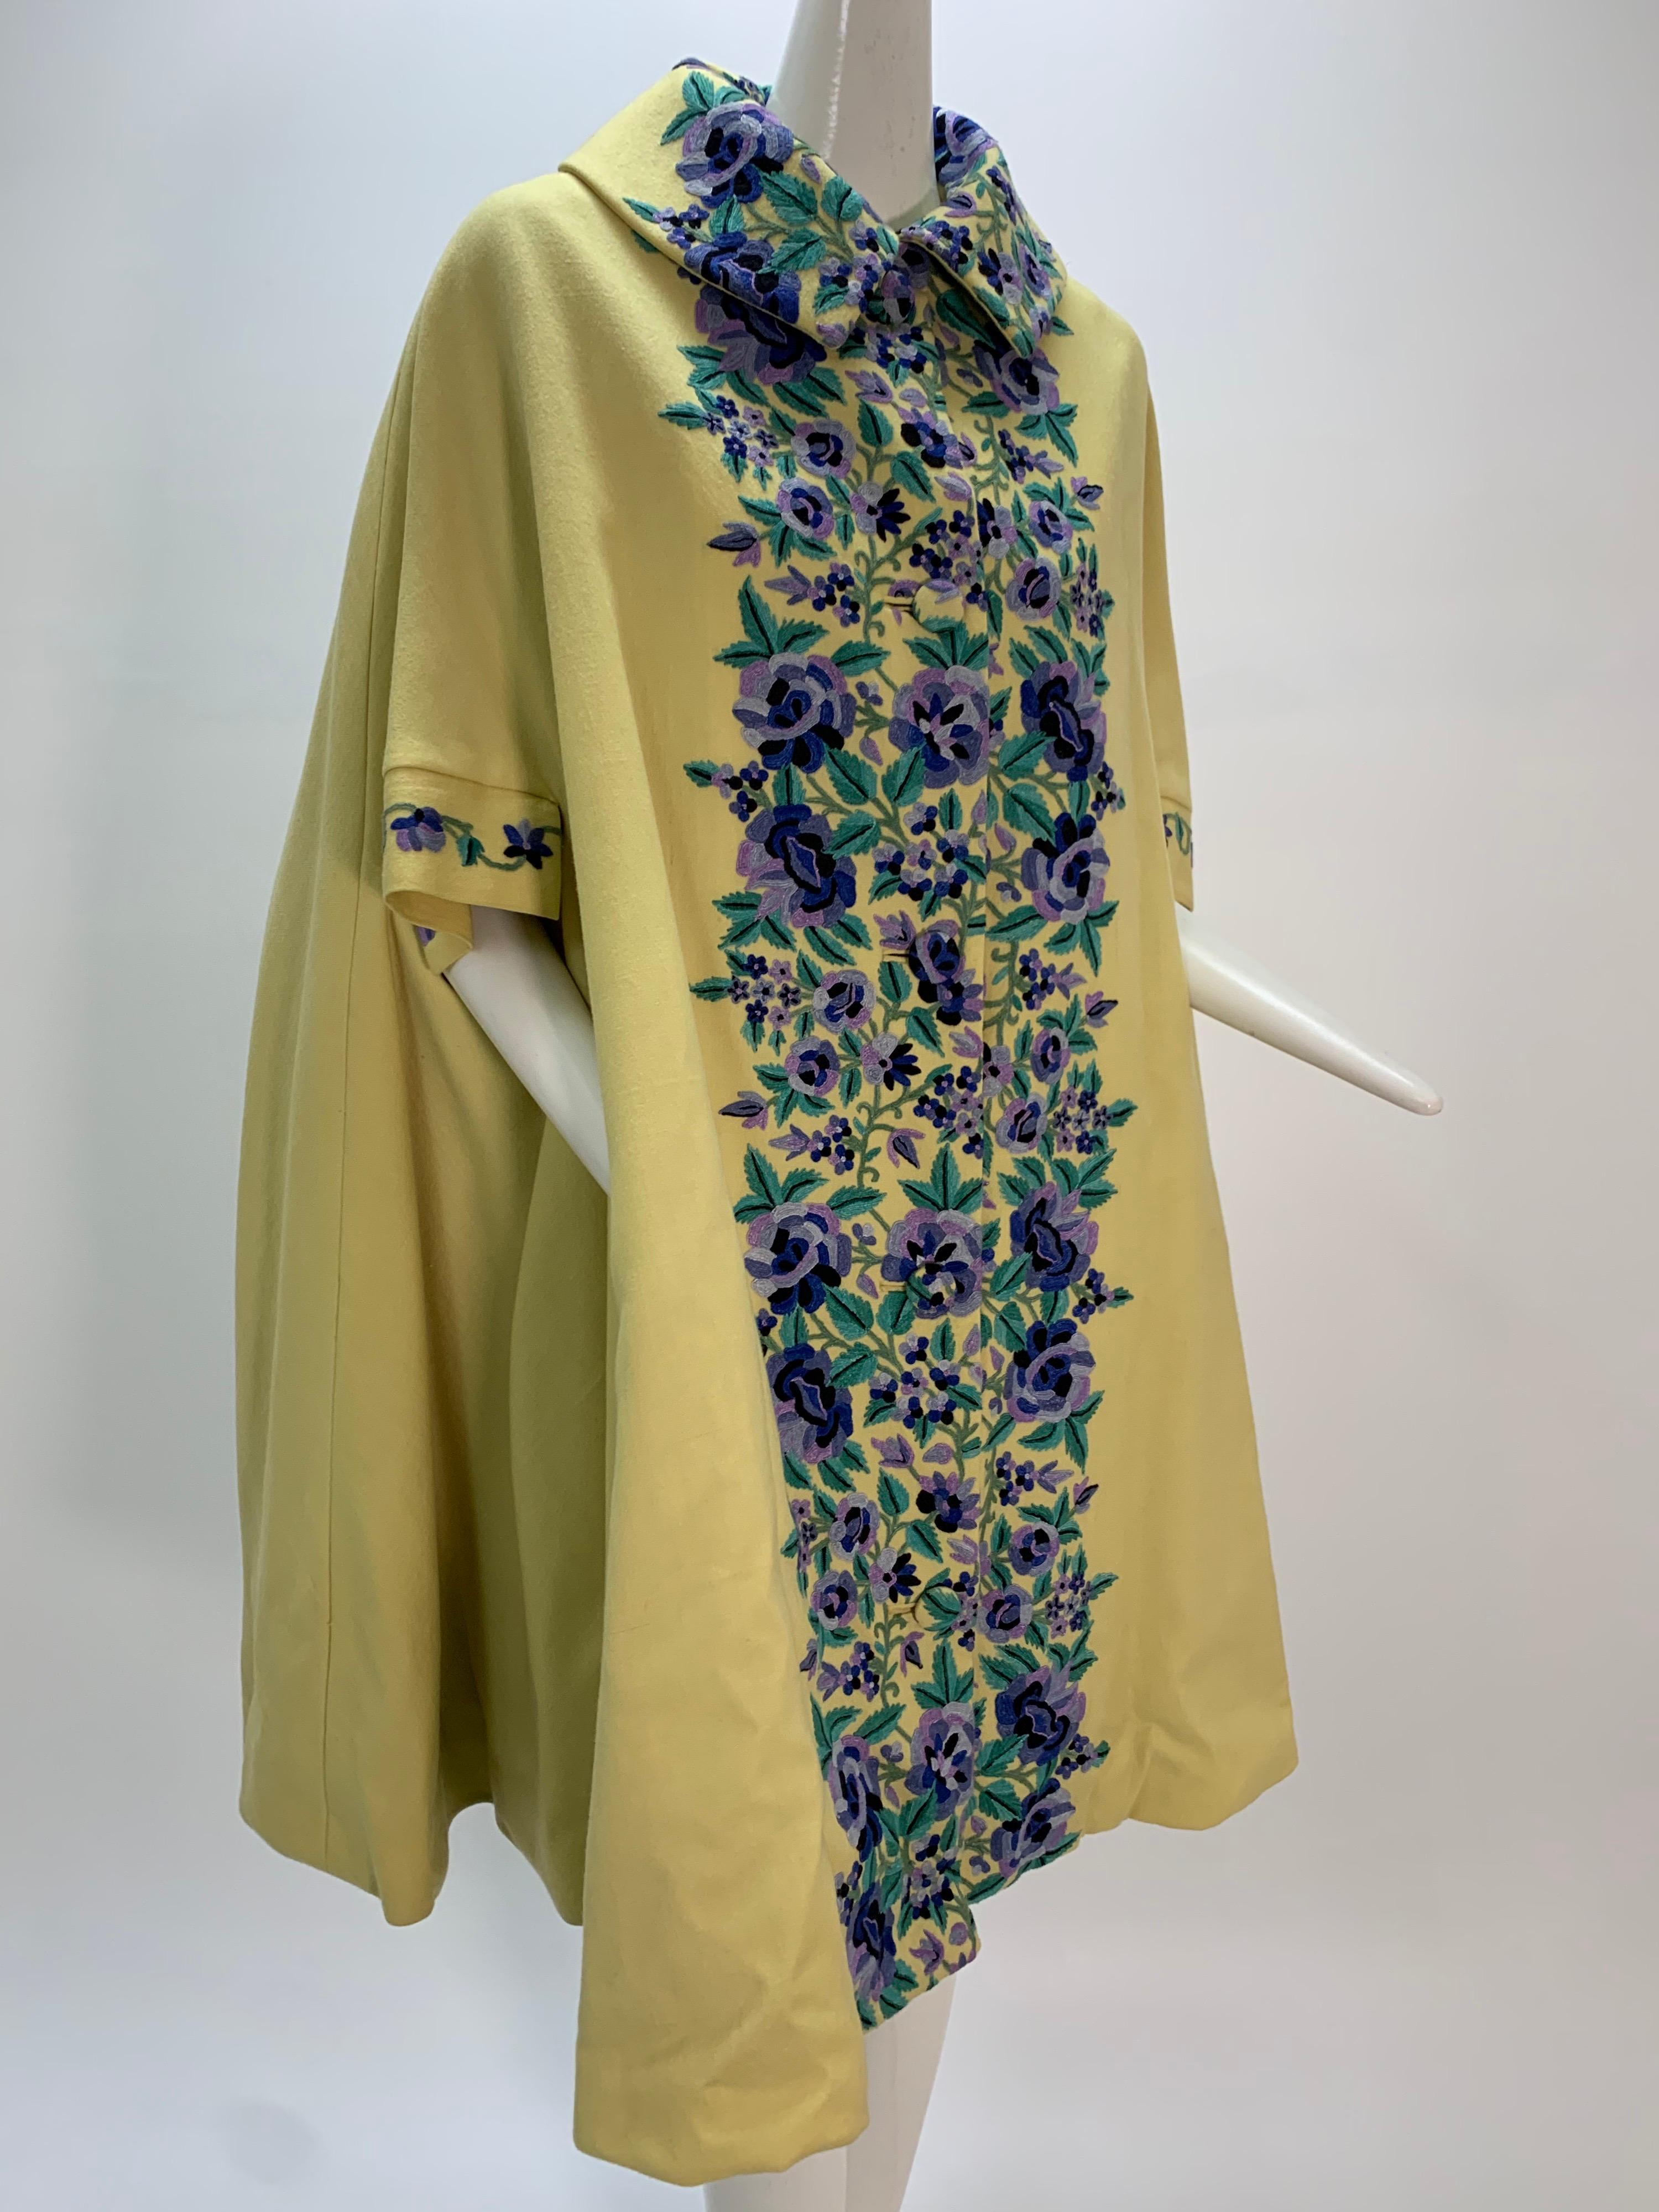 1960s Profils Du Monde Citrine Wool Swing Coat W/ Crewel Floral Embroidery Front For Sale 7